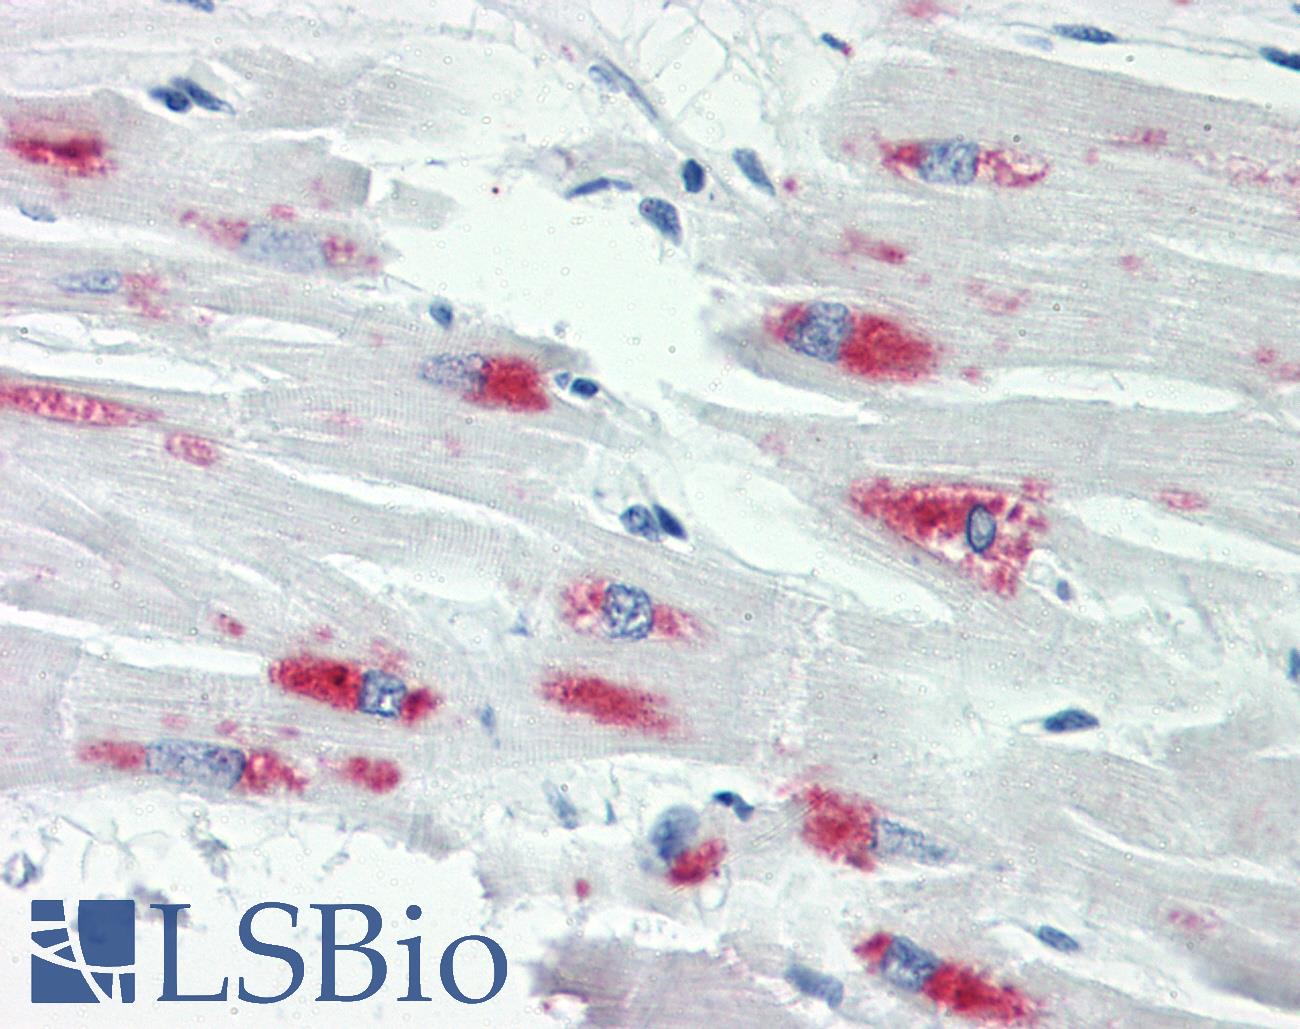 SMAD2+3 Antibody - Anti-SMAD2+3 antibody IHC staining of human heart. Immunohistochemistry of formalin-fixed, paraffin-embedded tissue after heat-induced antigen retrieval. Antibody dilution 1:50.